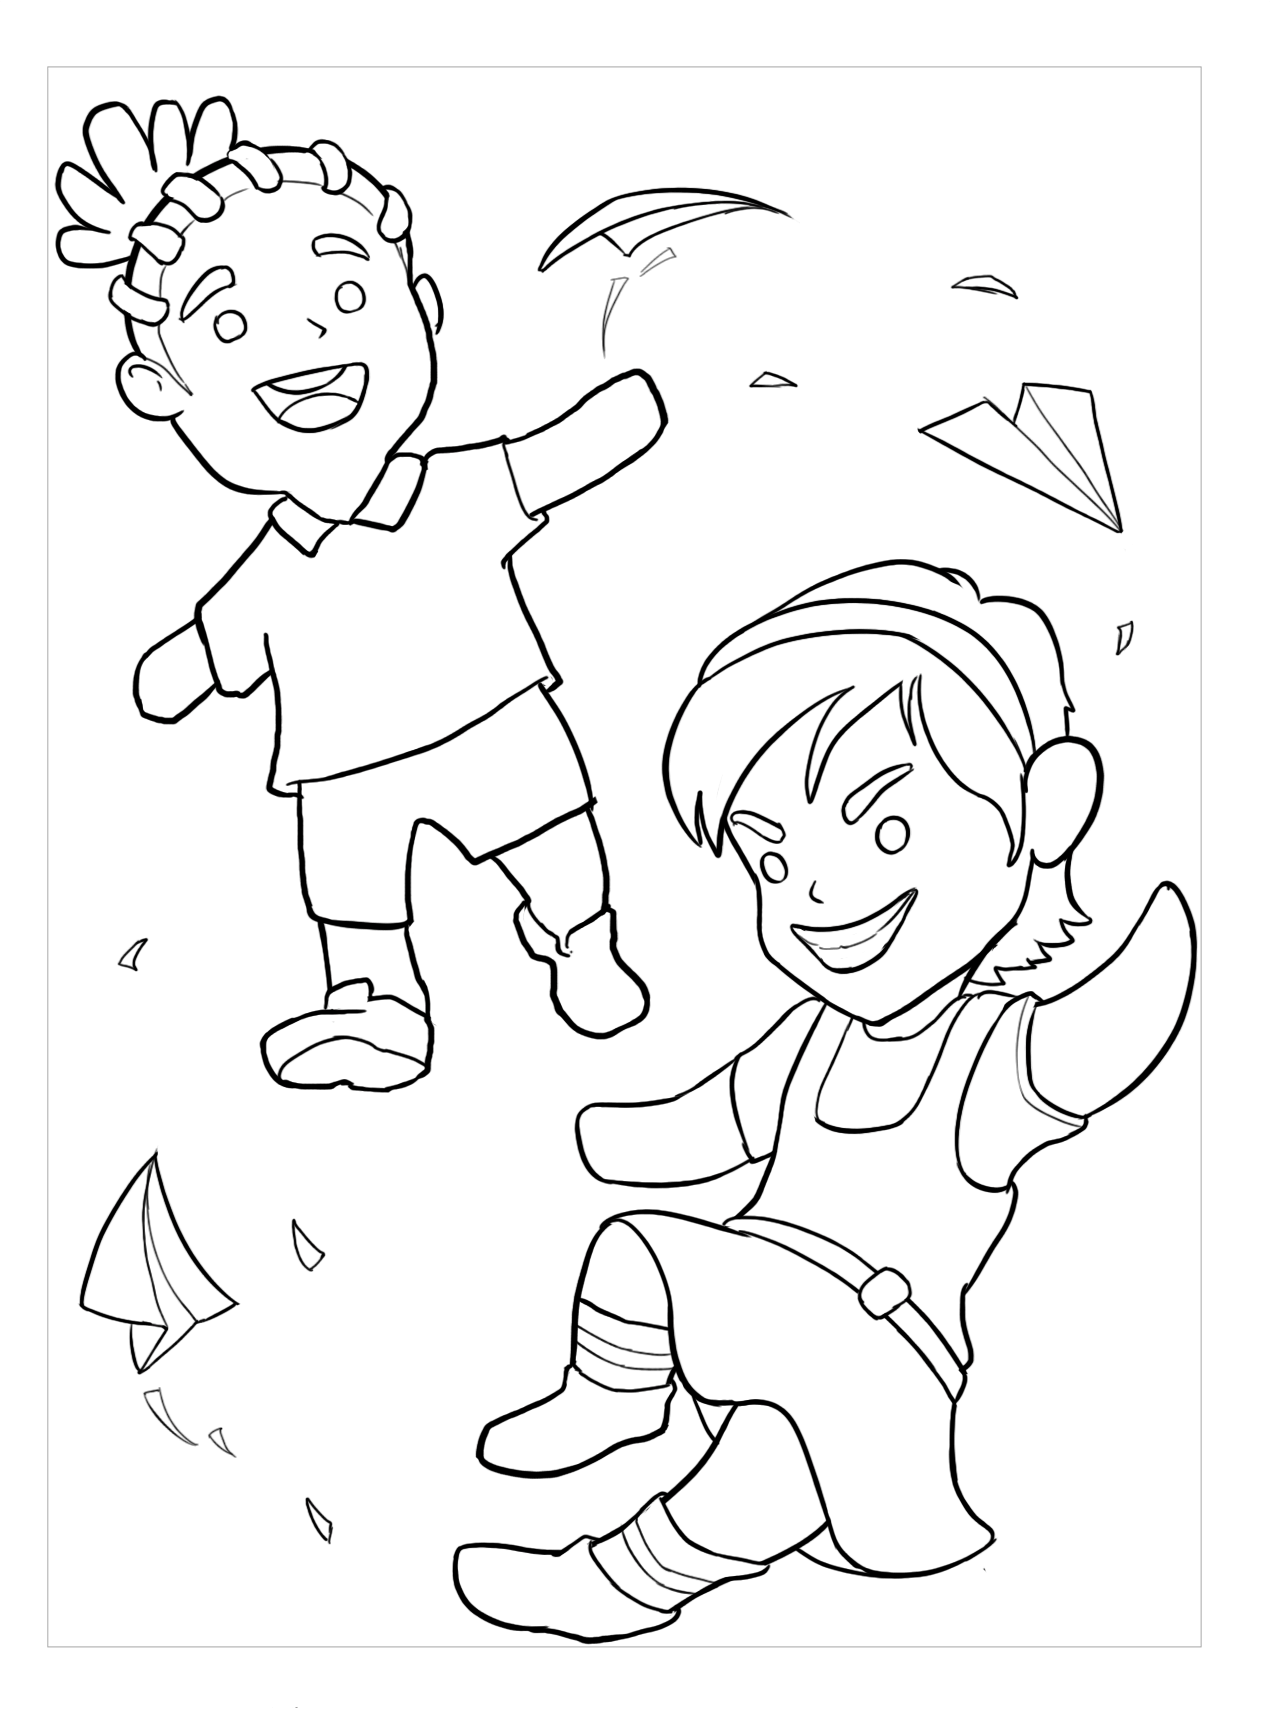 Boy and Girl Coloring Pages